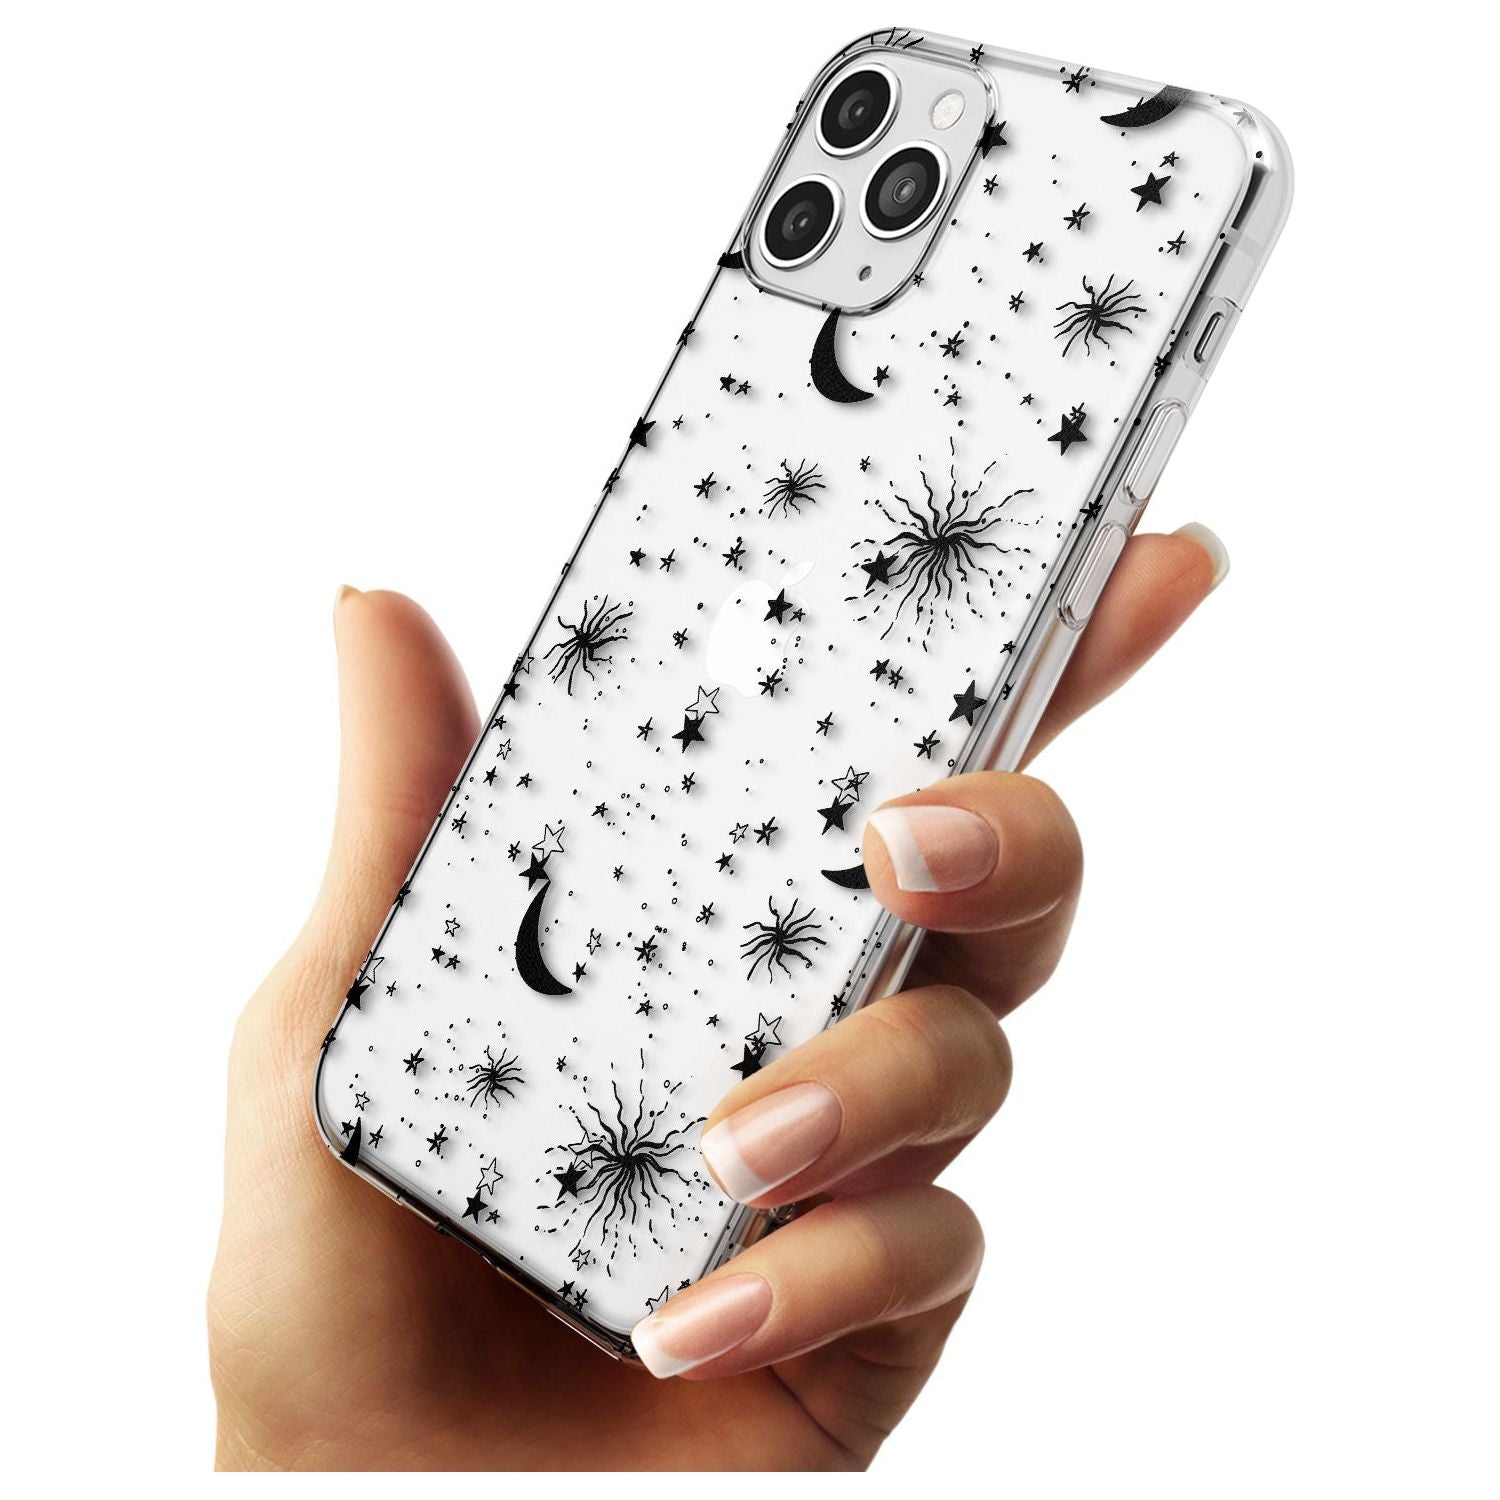 Moons & Stars Slim TPU Phone Case for iPhone 11 Pro Max